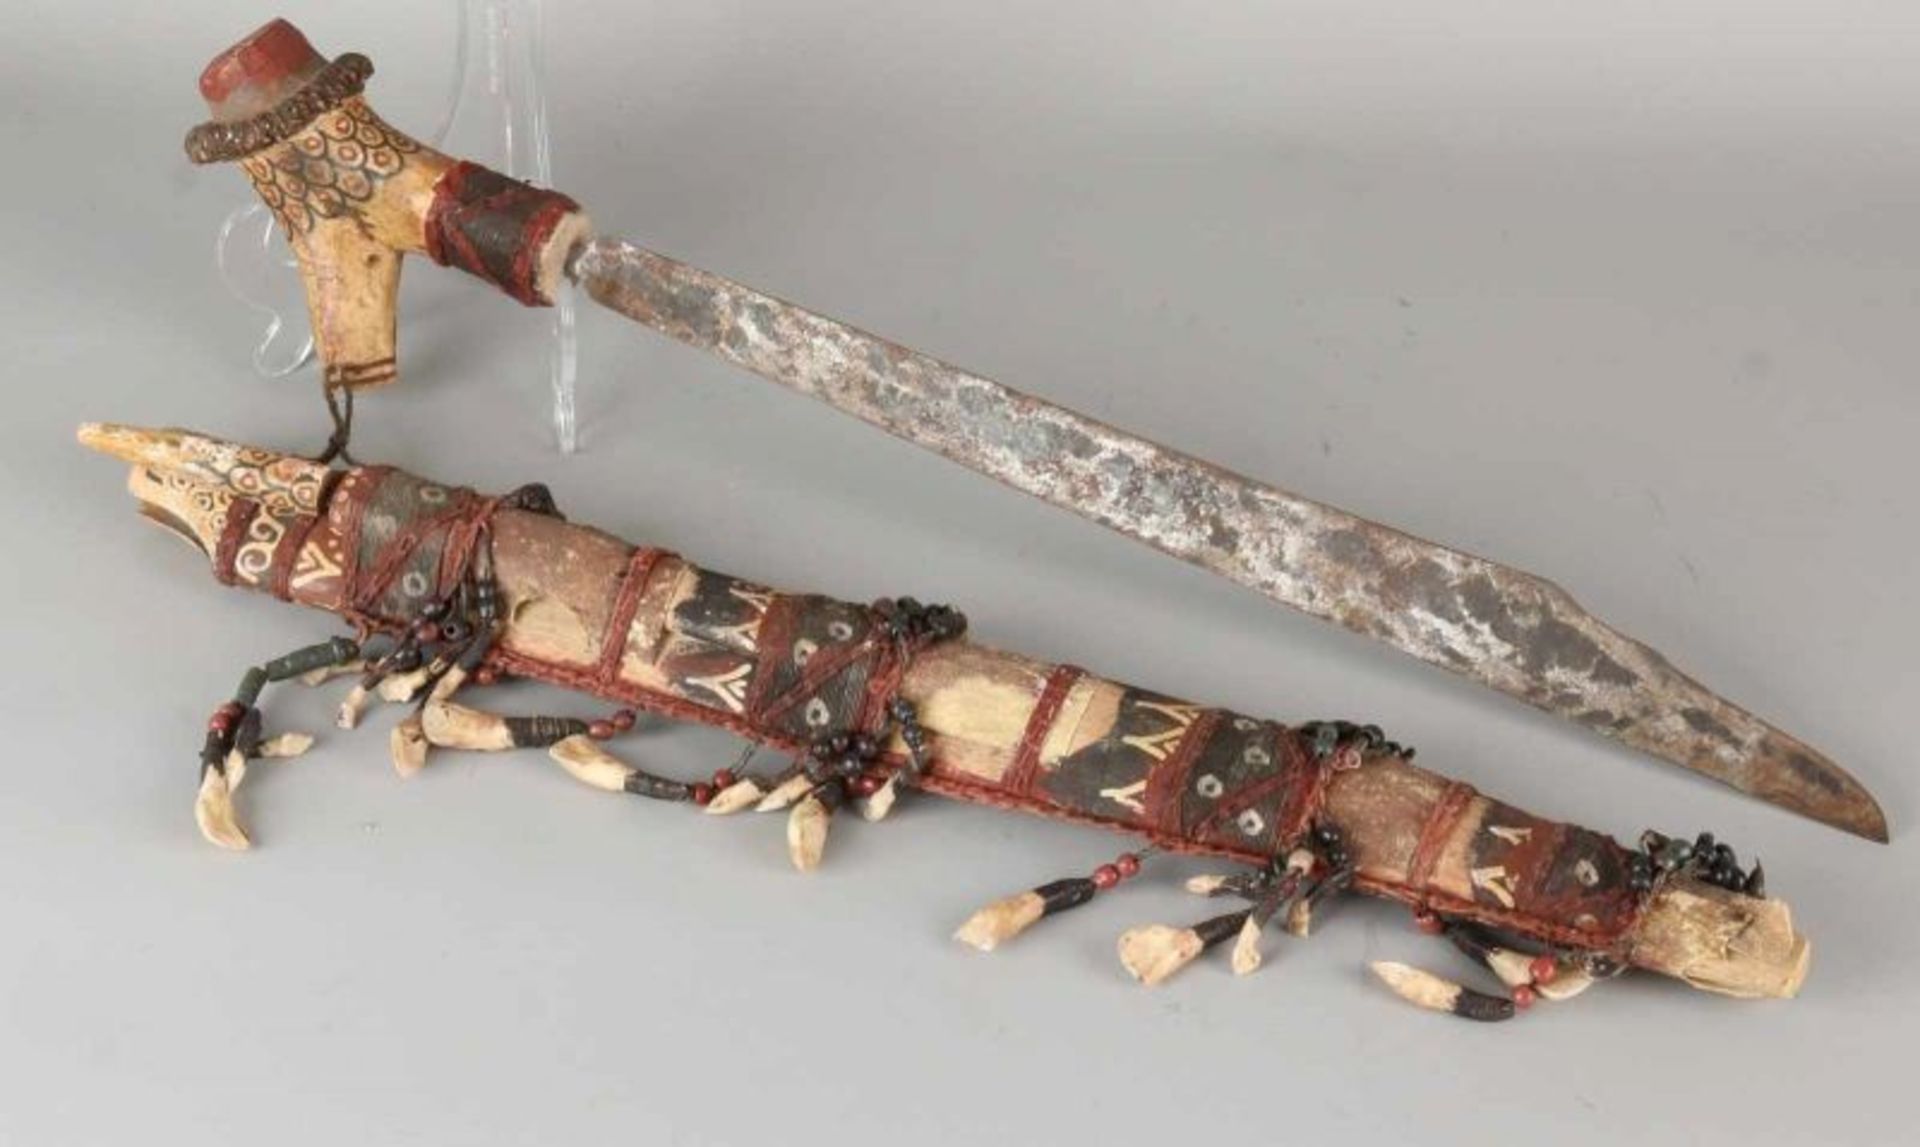 Old polychrome headhunter knife Borneo. Adorned with teeth. Size: L 62 cm. In good condition.